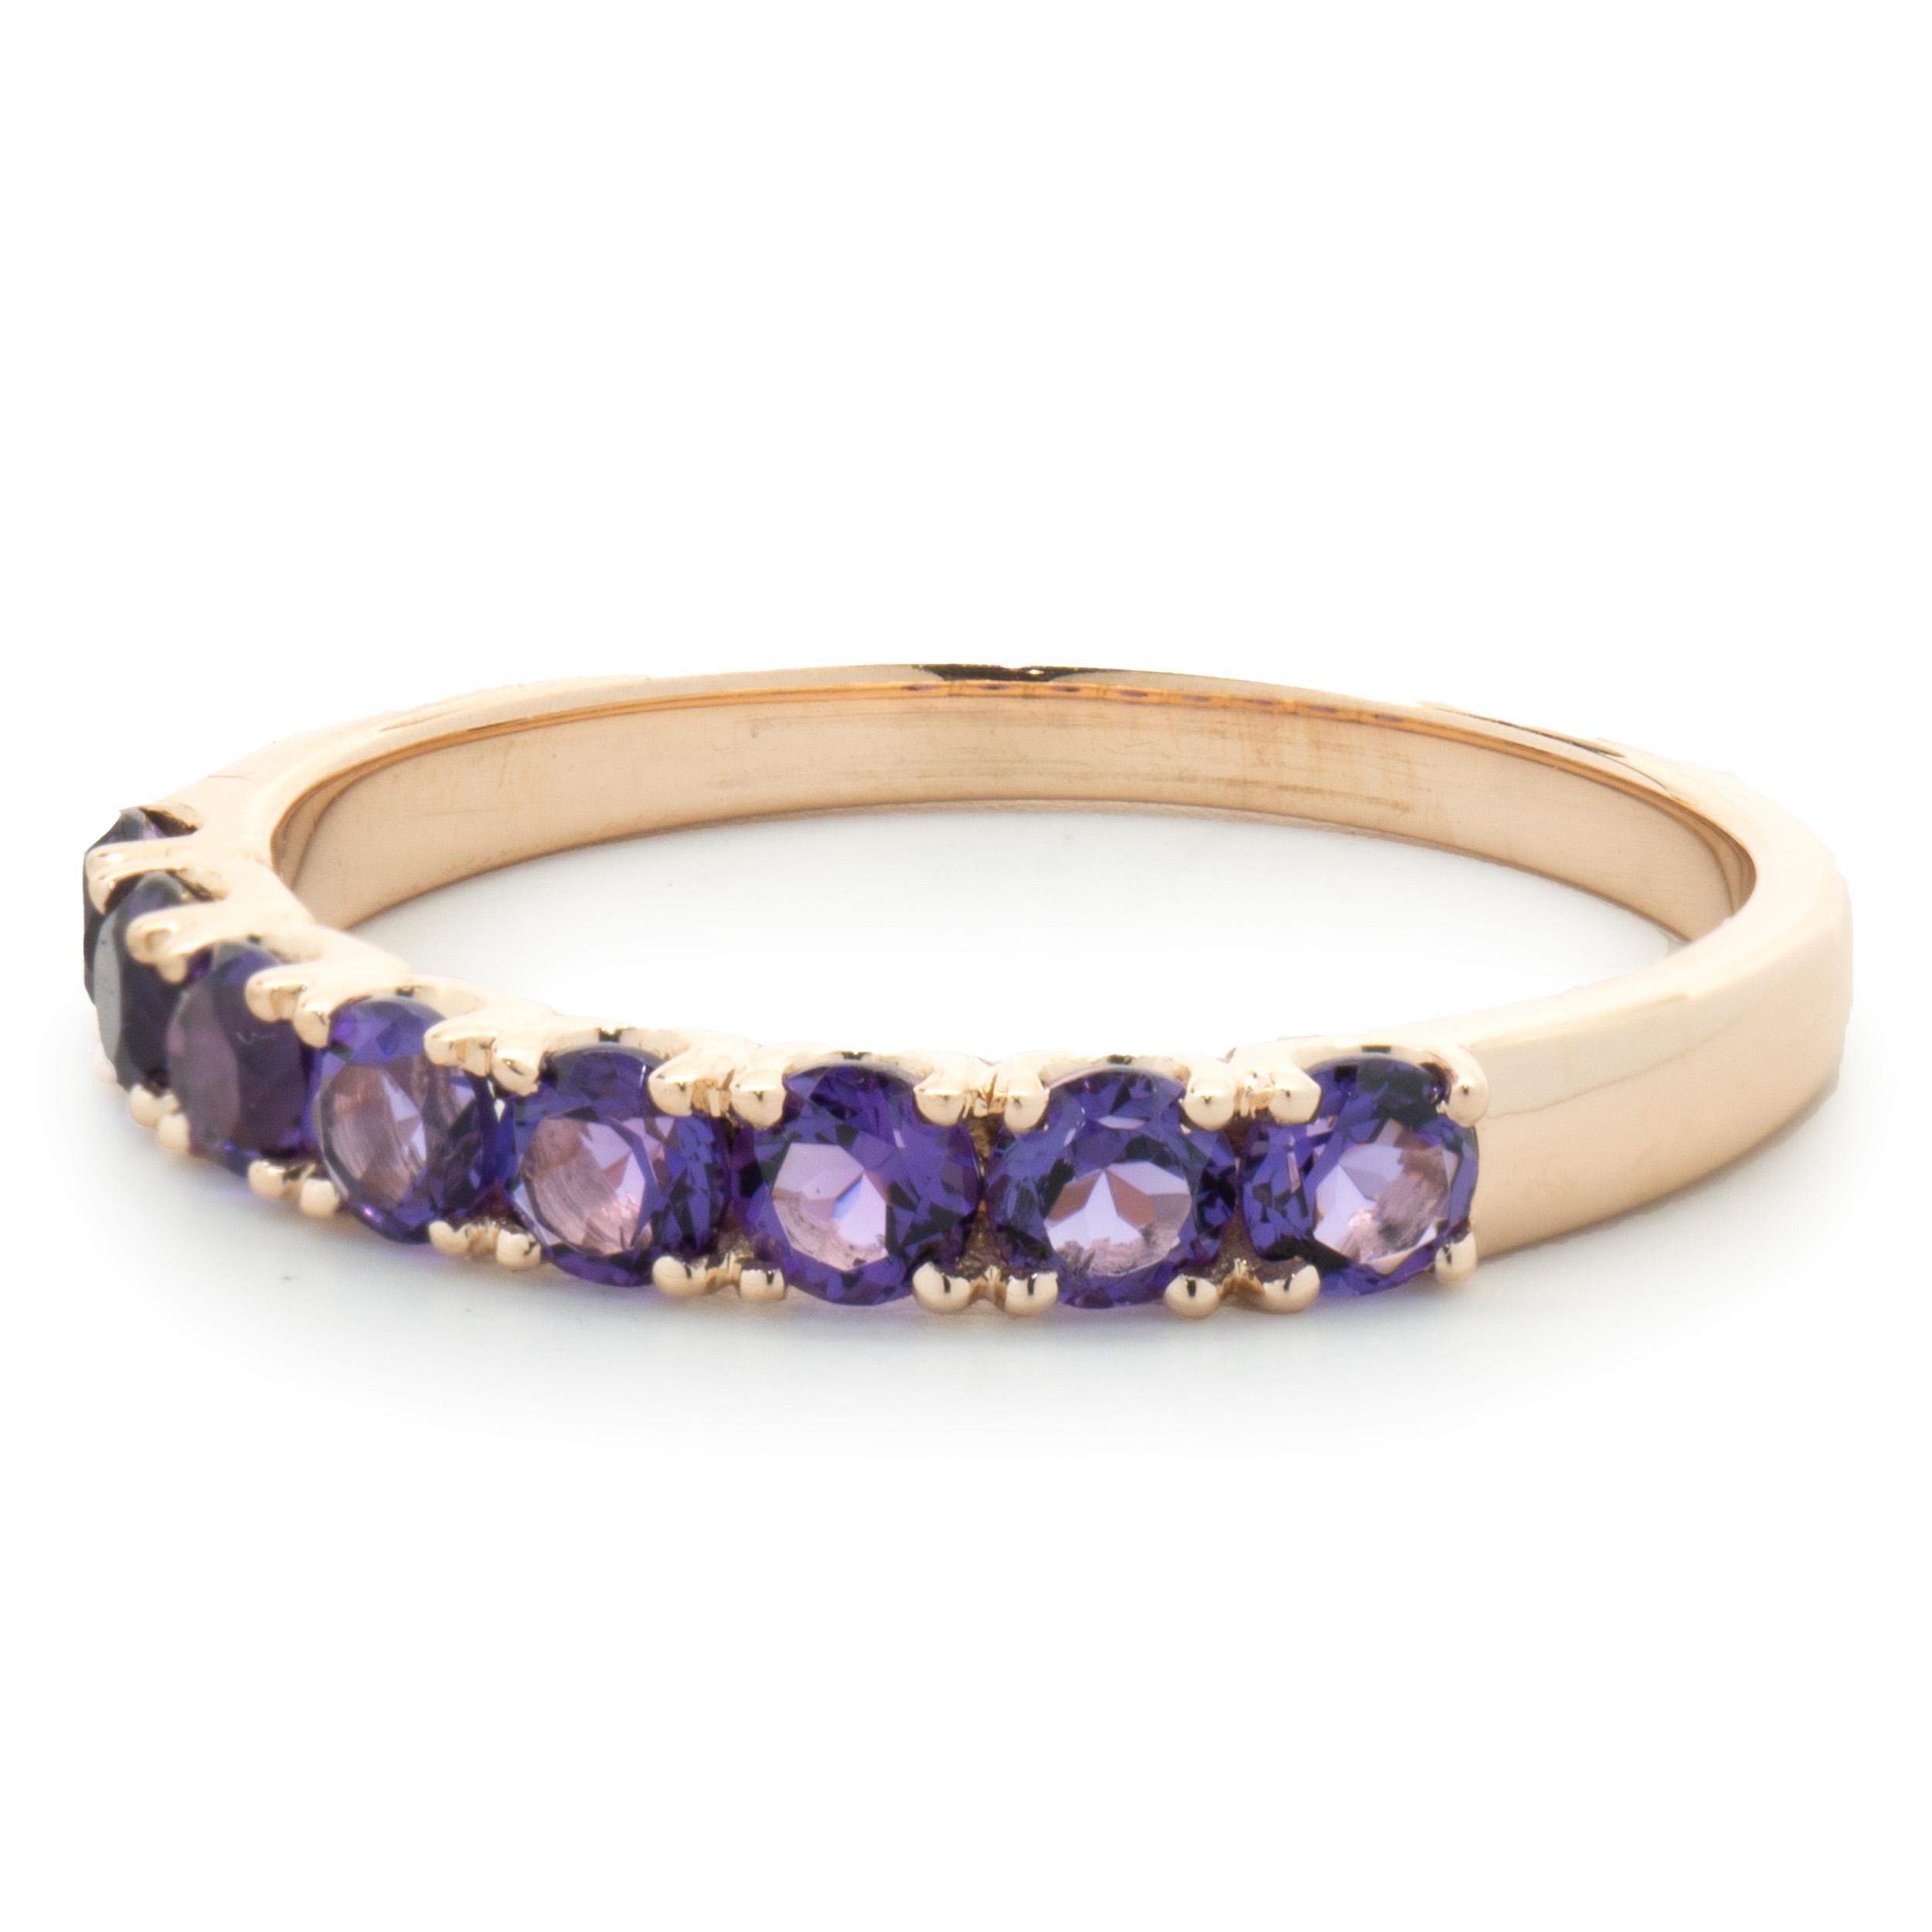 Designer: custom design
Material: 14K rose gold
Amethyst: 8 round cut = 0.80cttw
Dimensions: ring top measures 3mm wide
Ring Size: 8.25 (please allow two extra shipping days for sizing requests) 
Weight: 2.42 grams